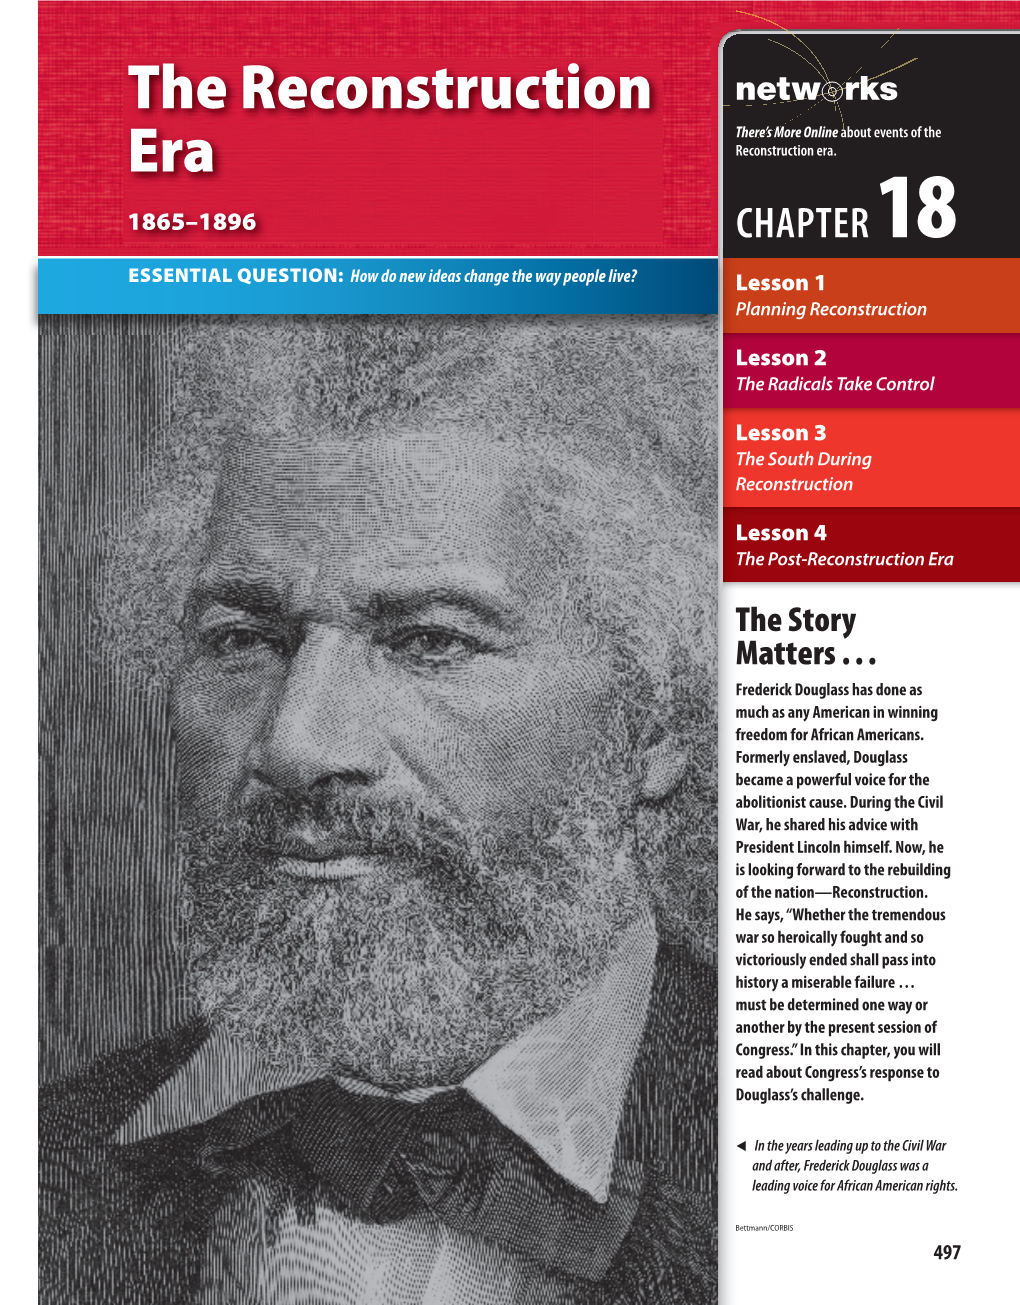 The Reconstruction Netw Rks There’S More Online About Events of the Era Reconstruction Era